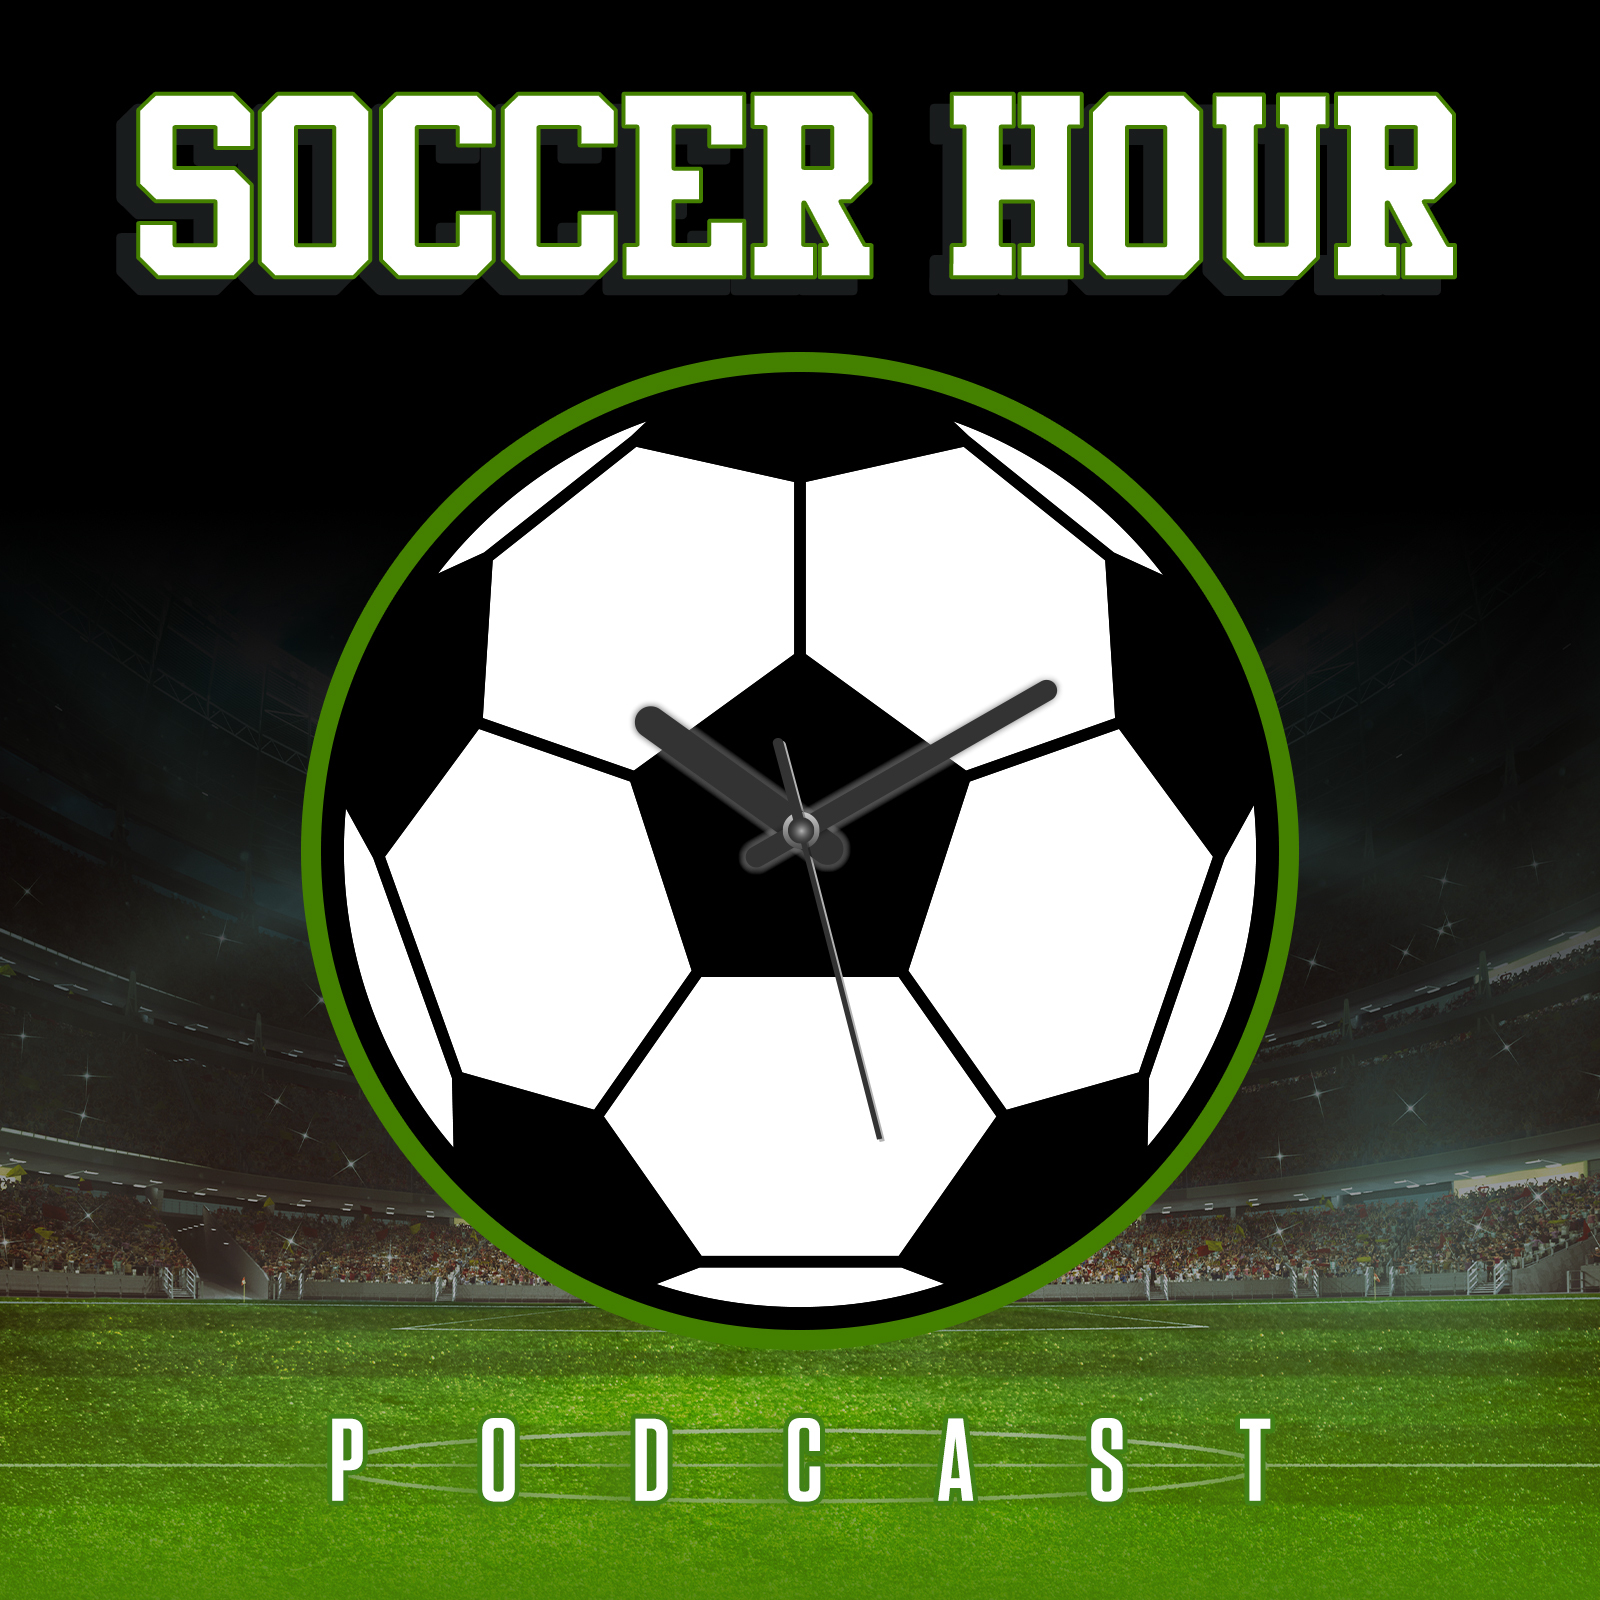 9/20: Mariano Trujillo of MLS Season Pass, plus a preview of Quakes-Timbers